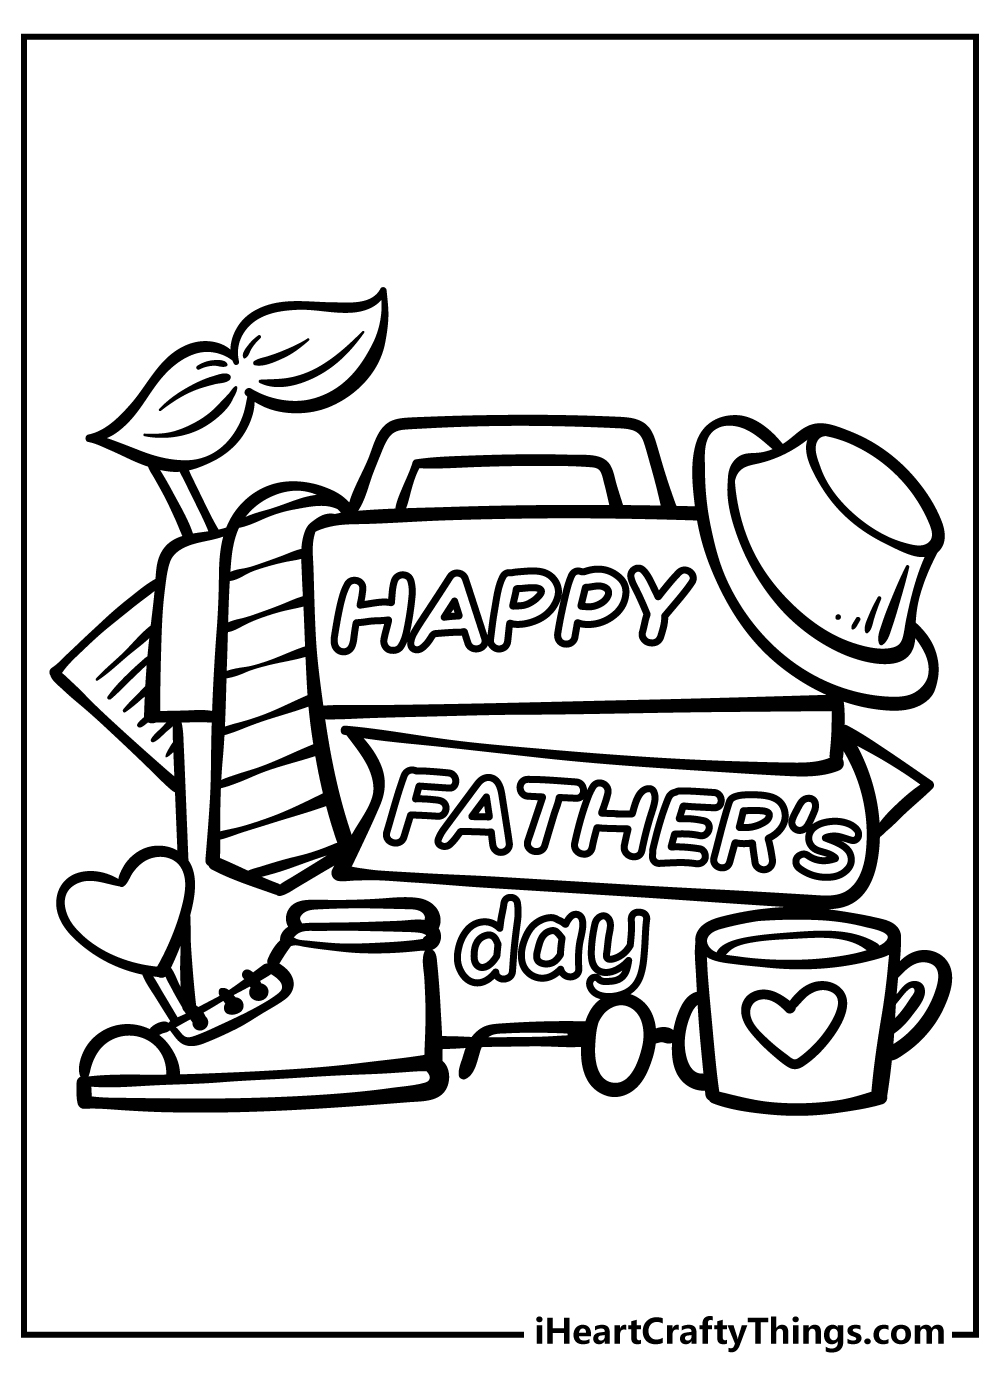 Fathers day coloring pages free printables